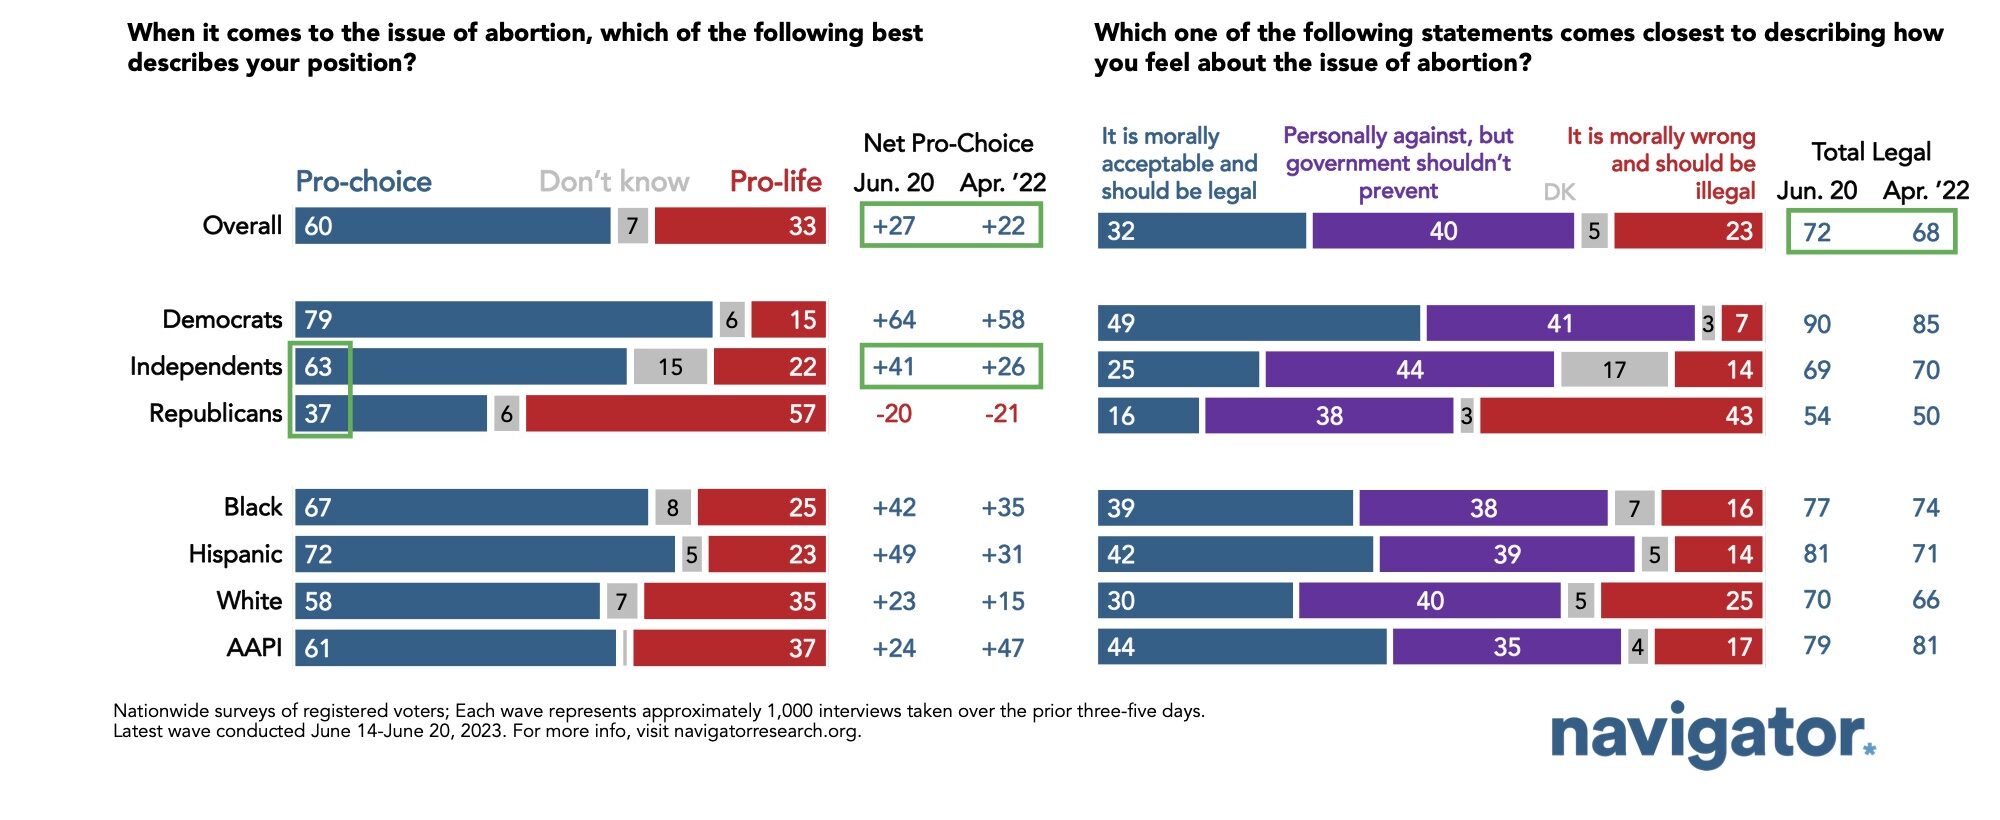 Bar graph of polling data from Navigator Research. Title: Majorities Remain Pro-Choice and Say Abortion Should Be Legal